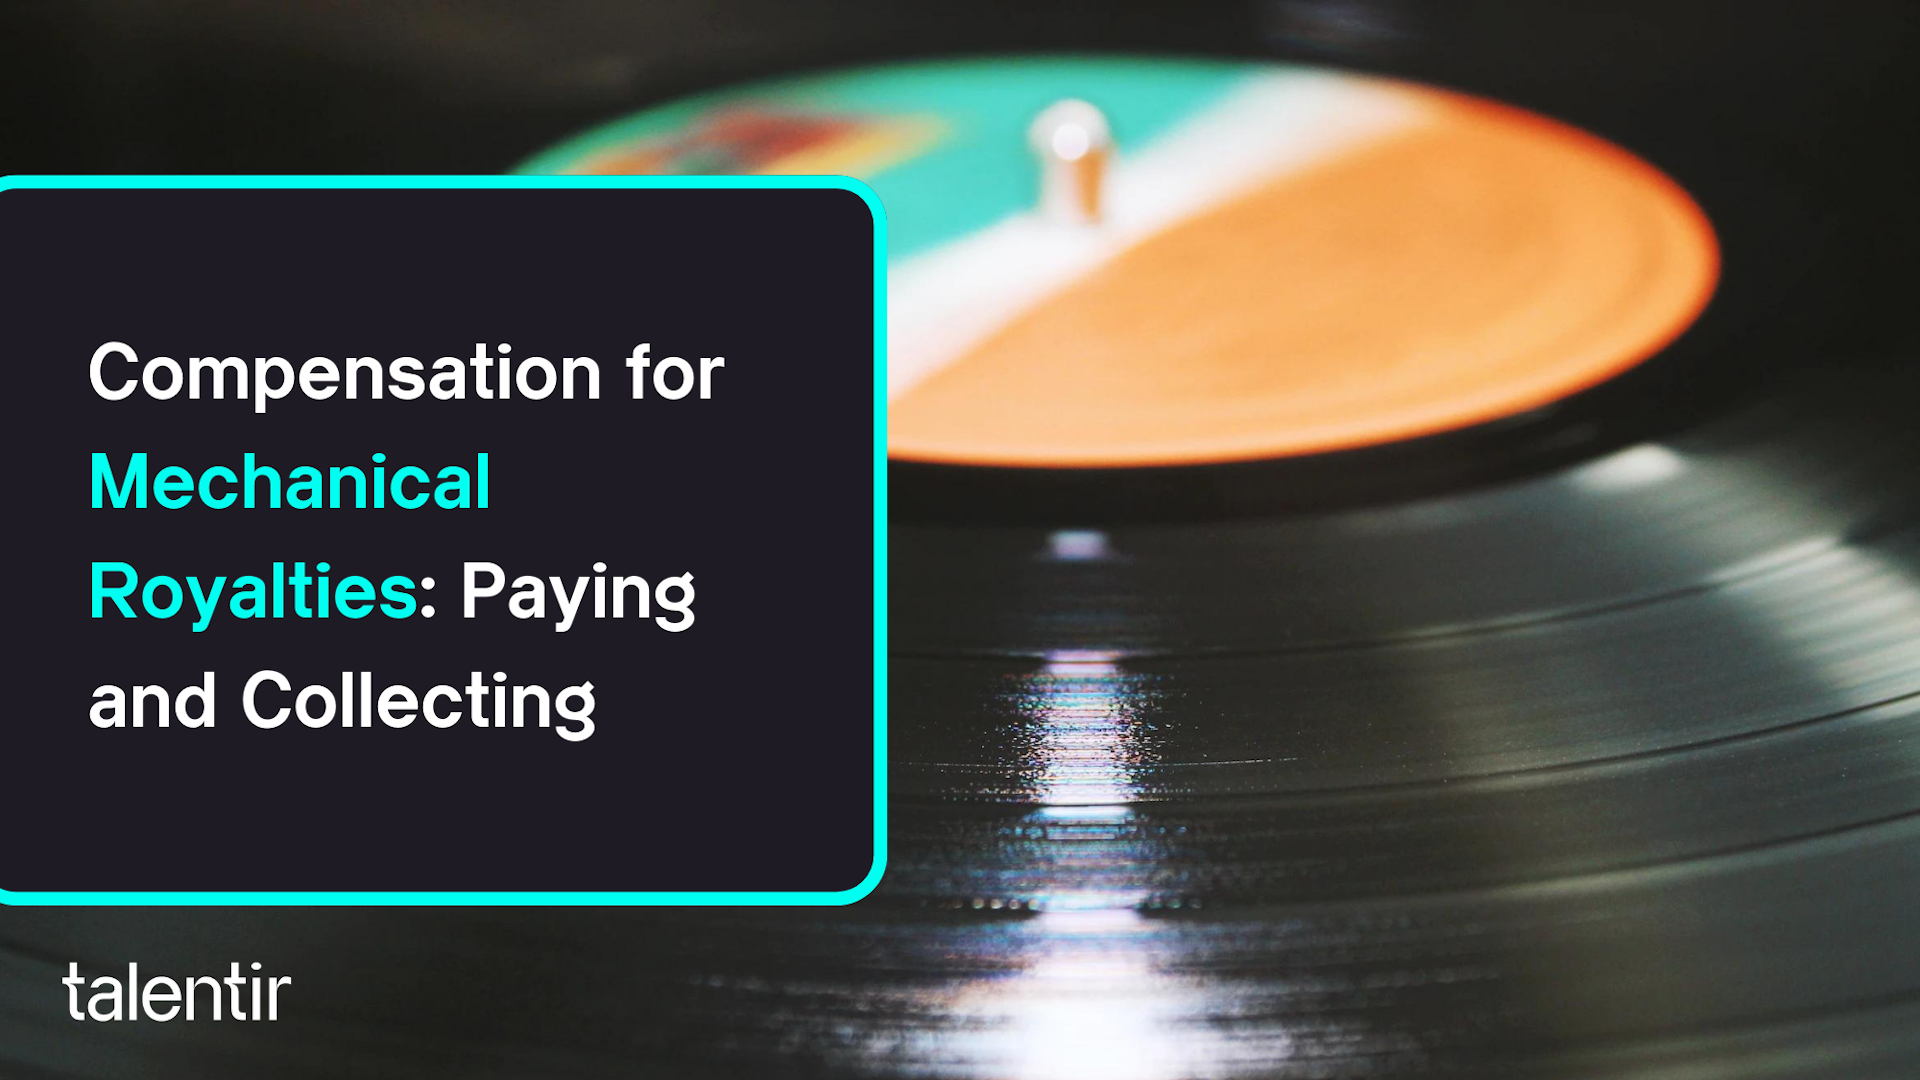 An exposition into mechanical royalties. Learn who pays and collects them, their significance for artists, and how they impact the music industry.